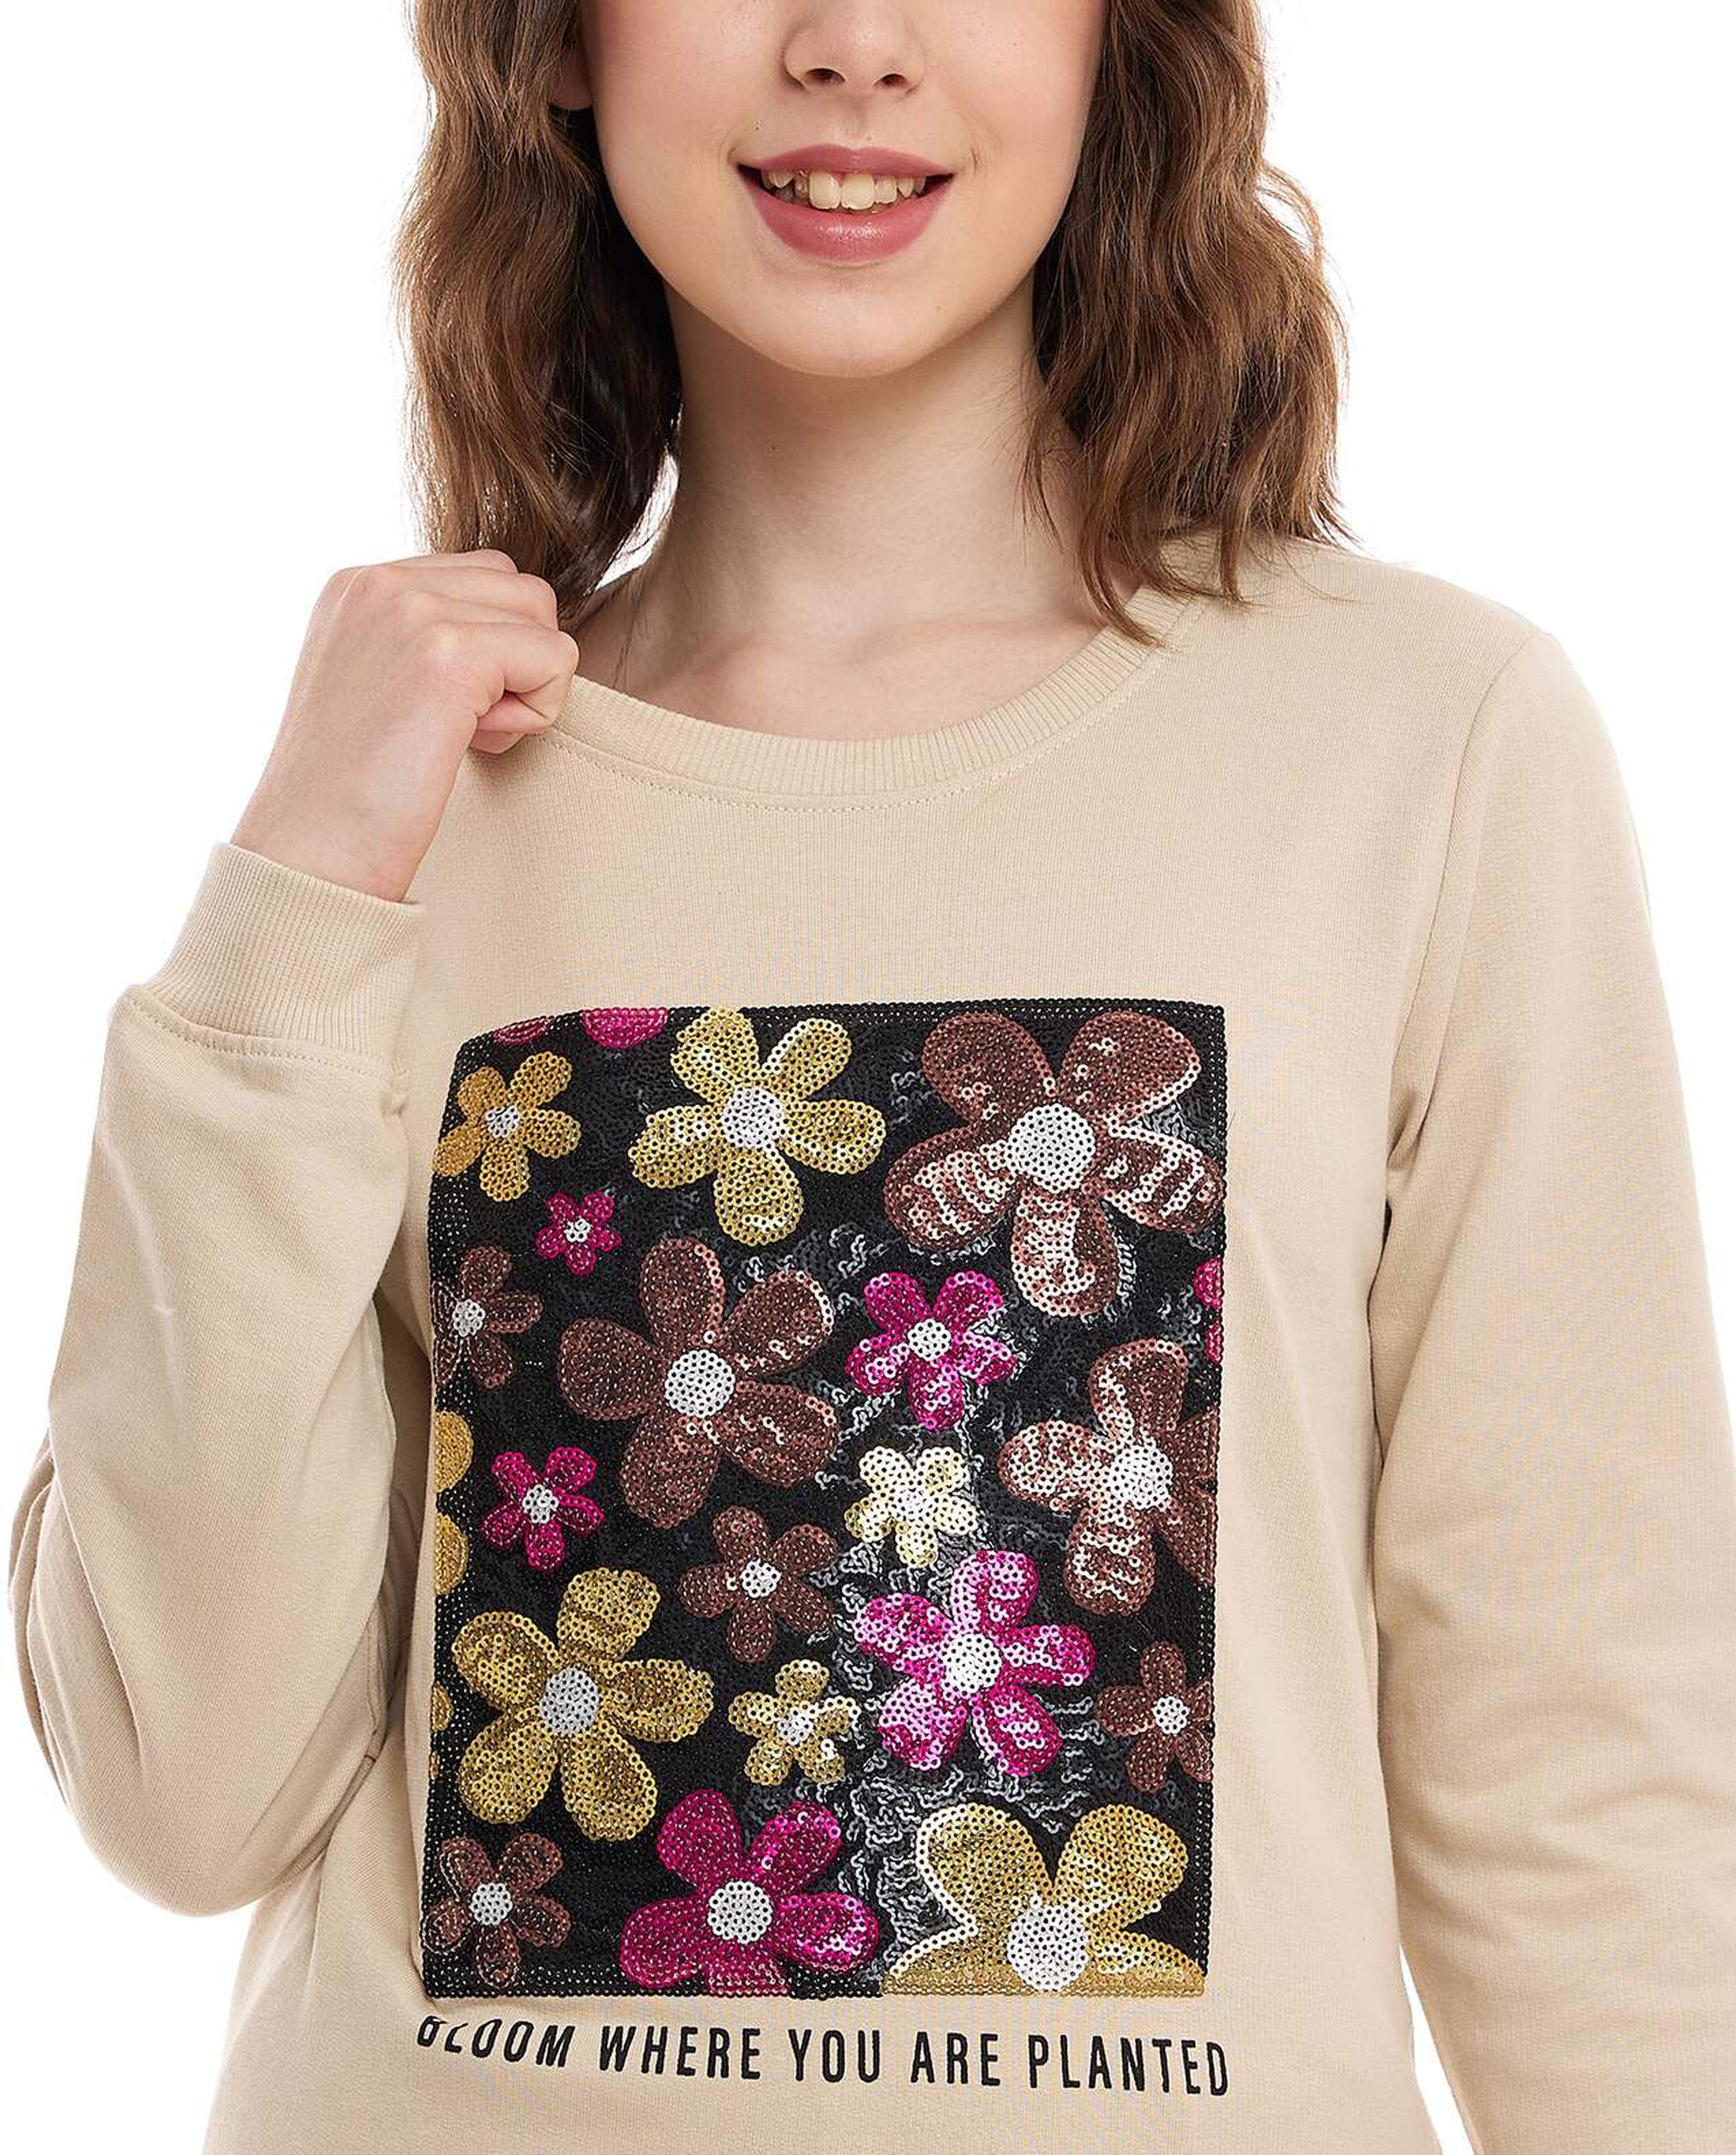 Sequins Detail Sweatshirt with Crew Neck and Long Sleeves